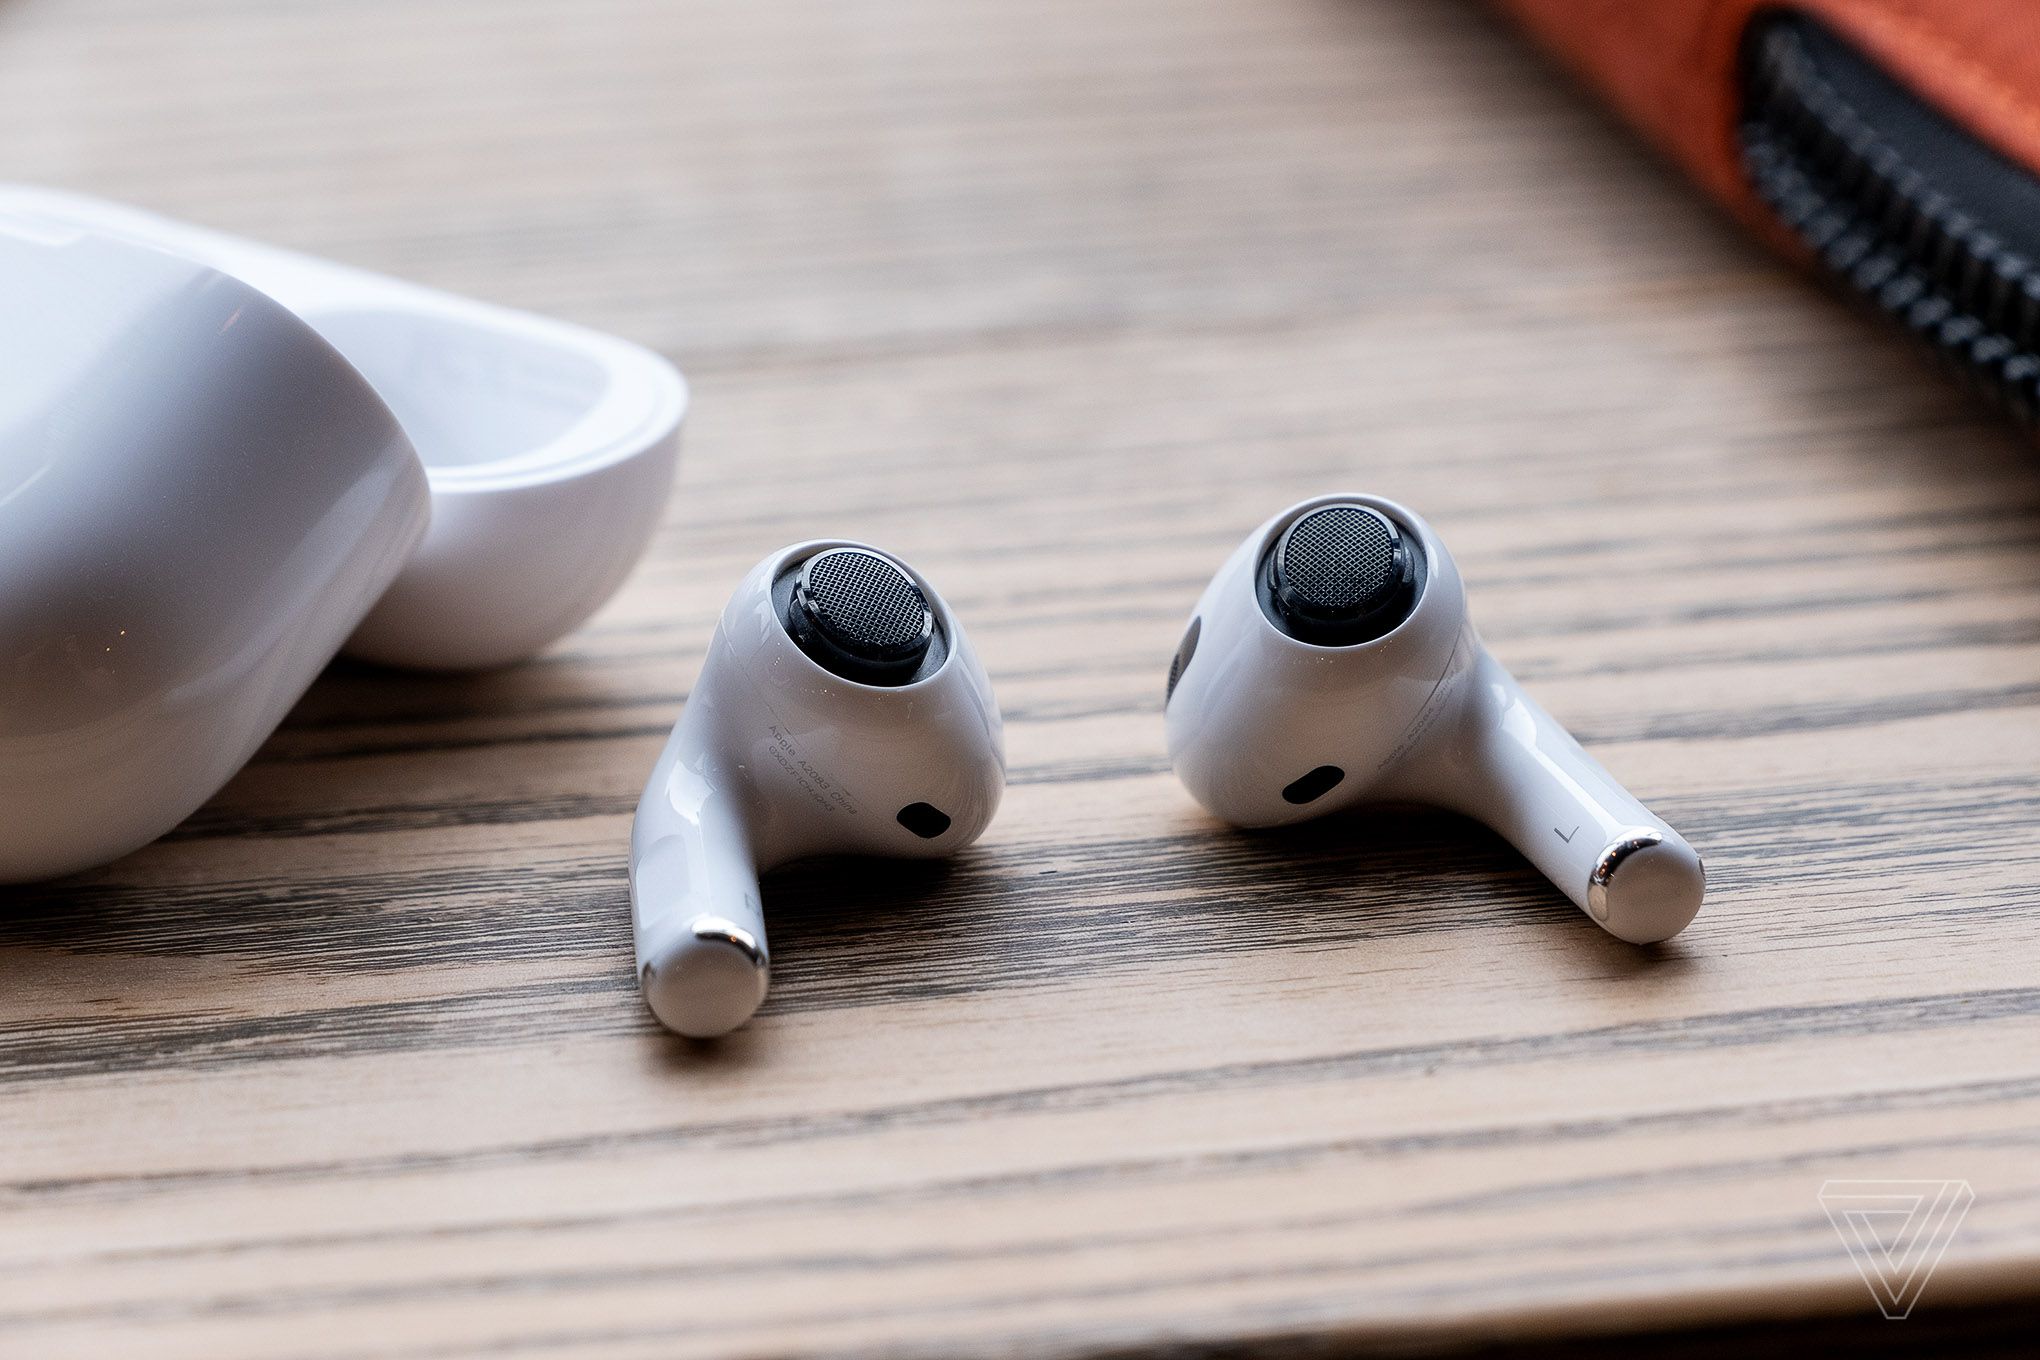 Apple AirPods 2 rumor roundup: everything we think we know - The Verge